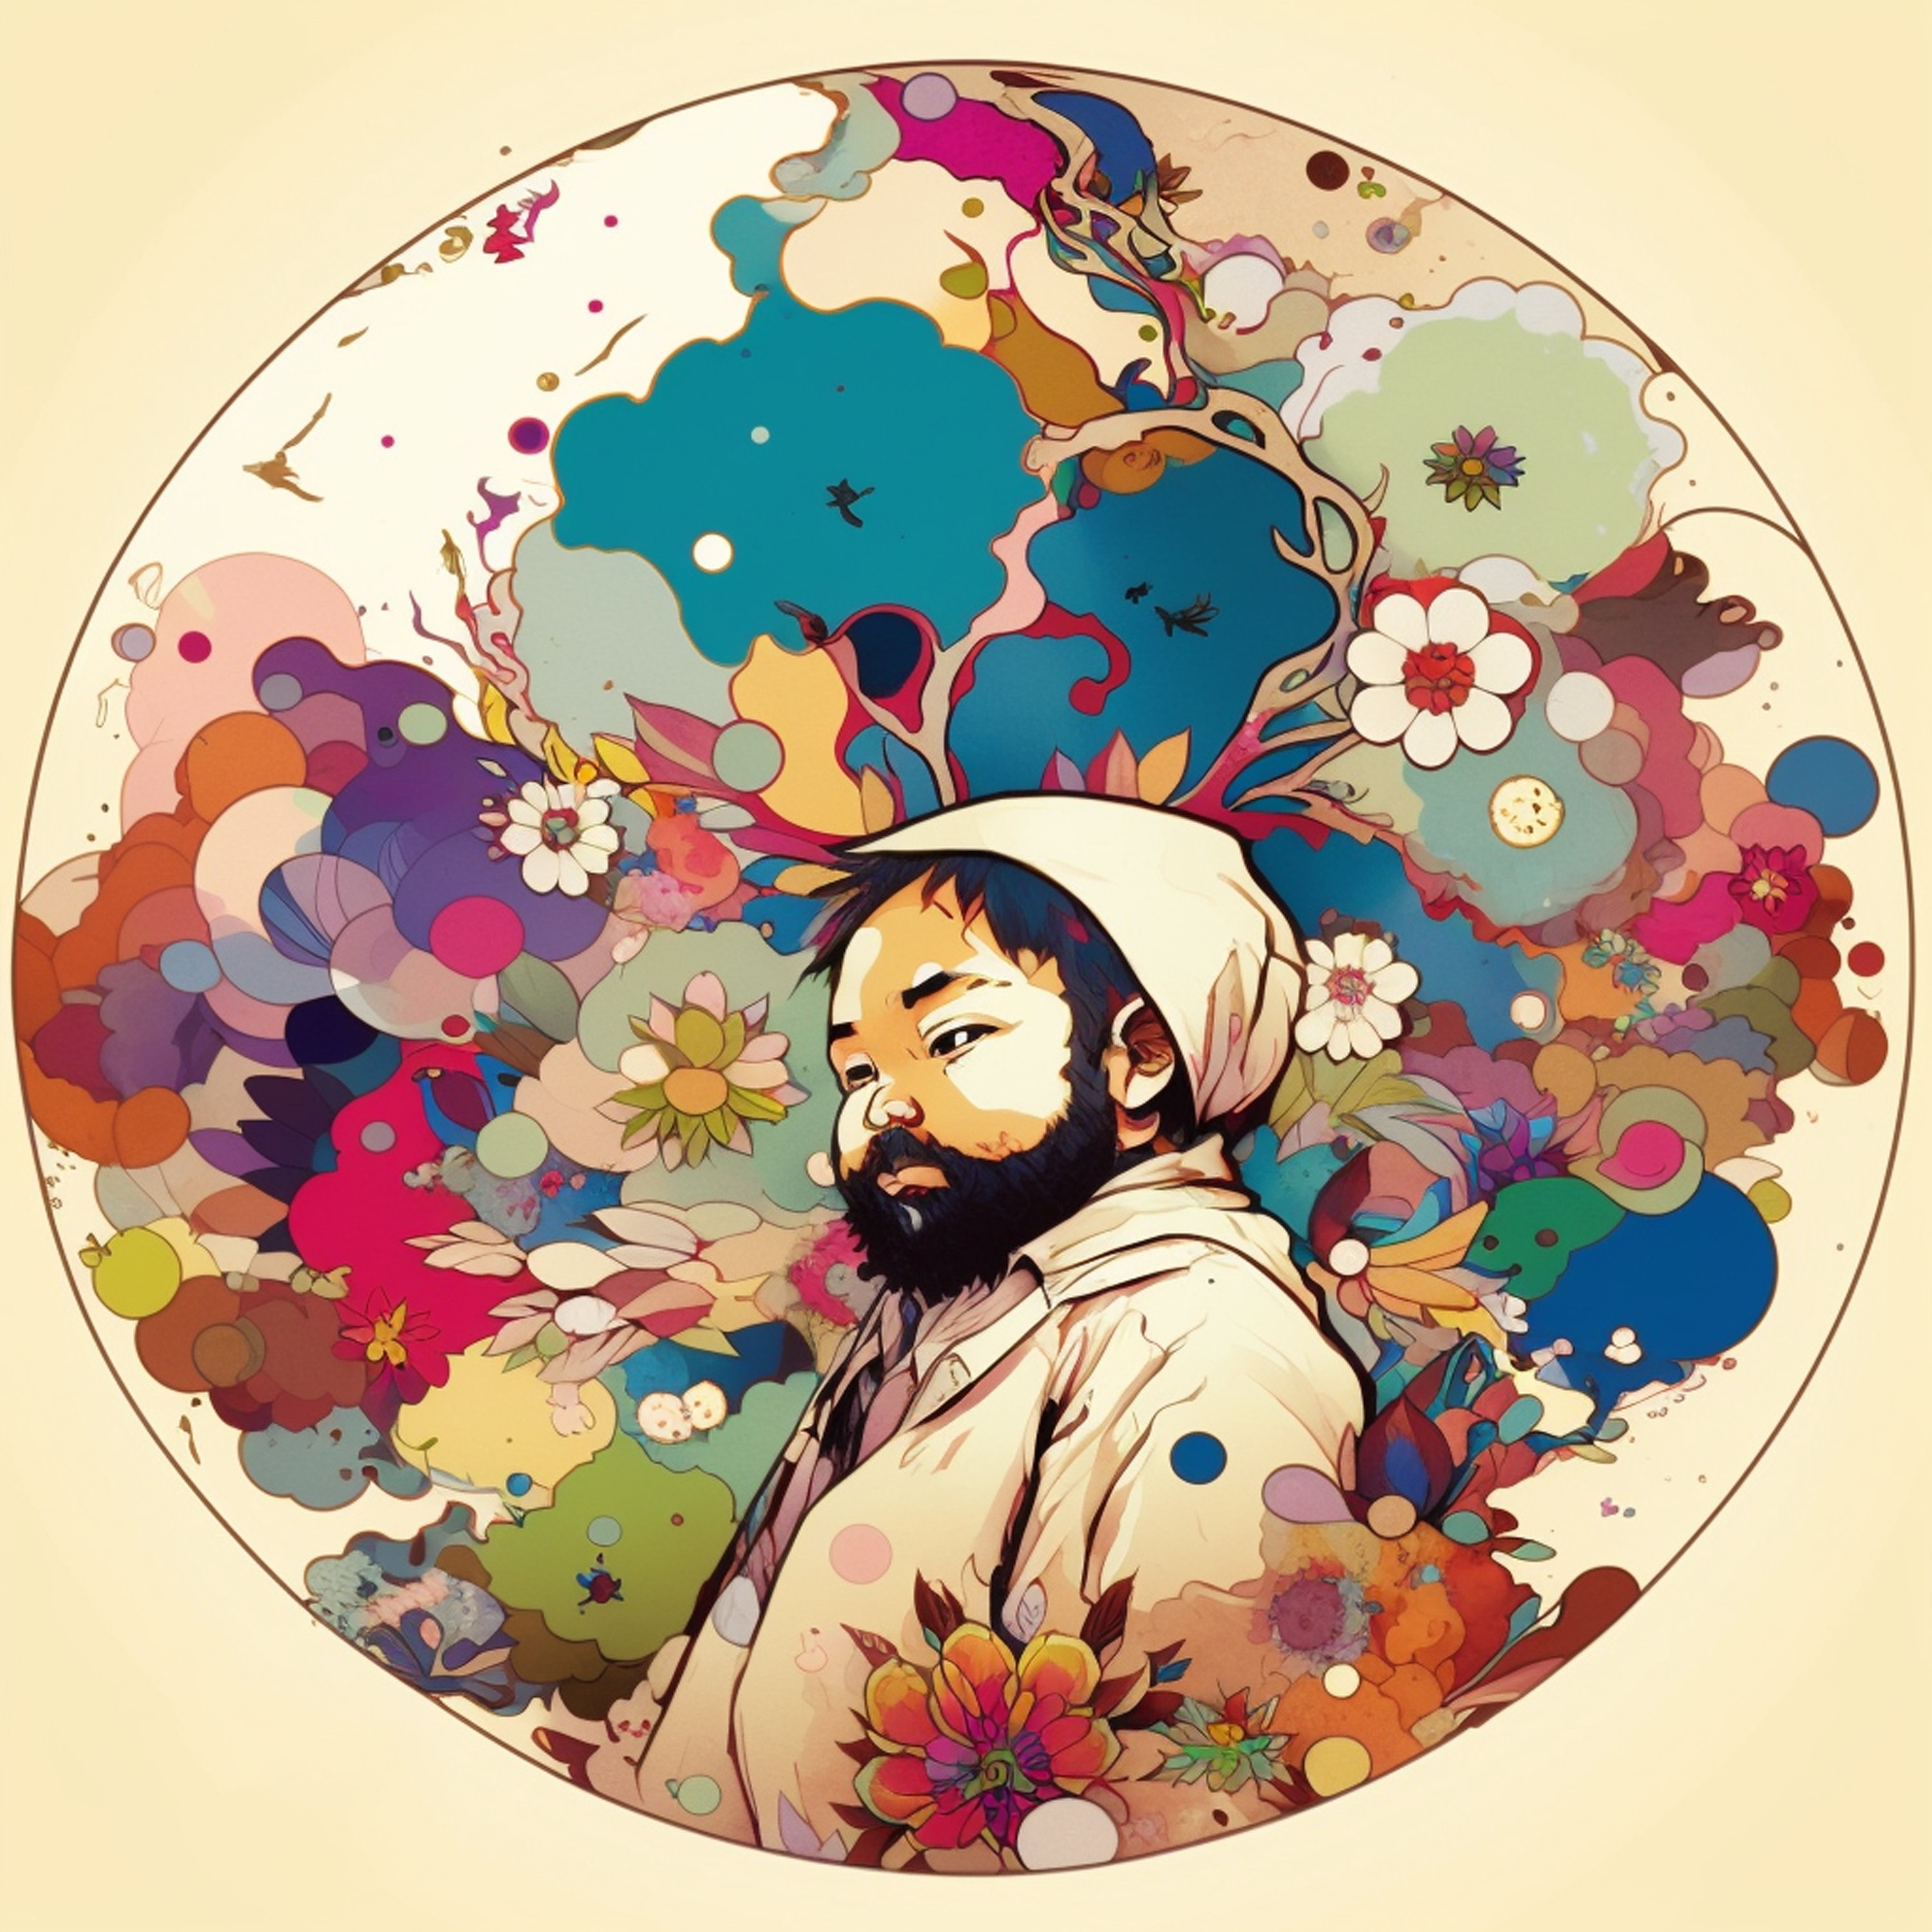 Nujabes Tribute Wallpaper by kitolo on DeviantArt